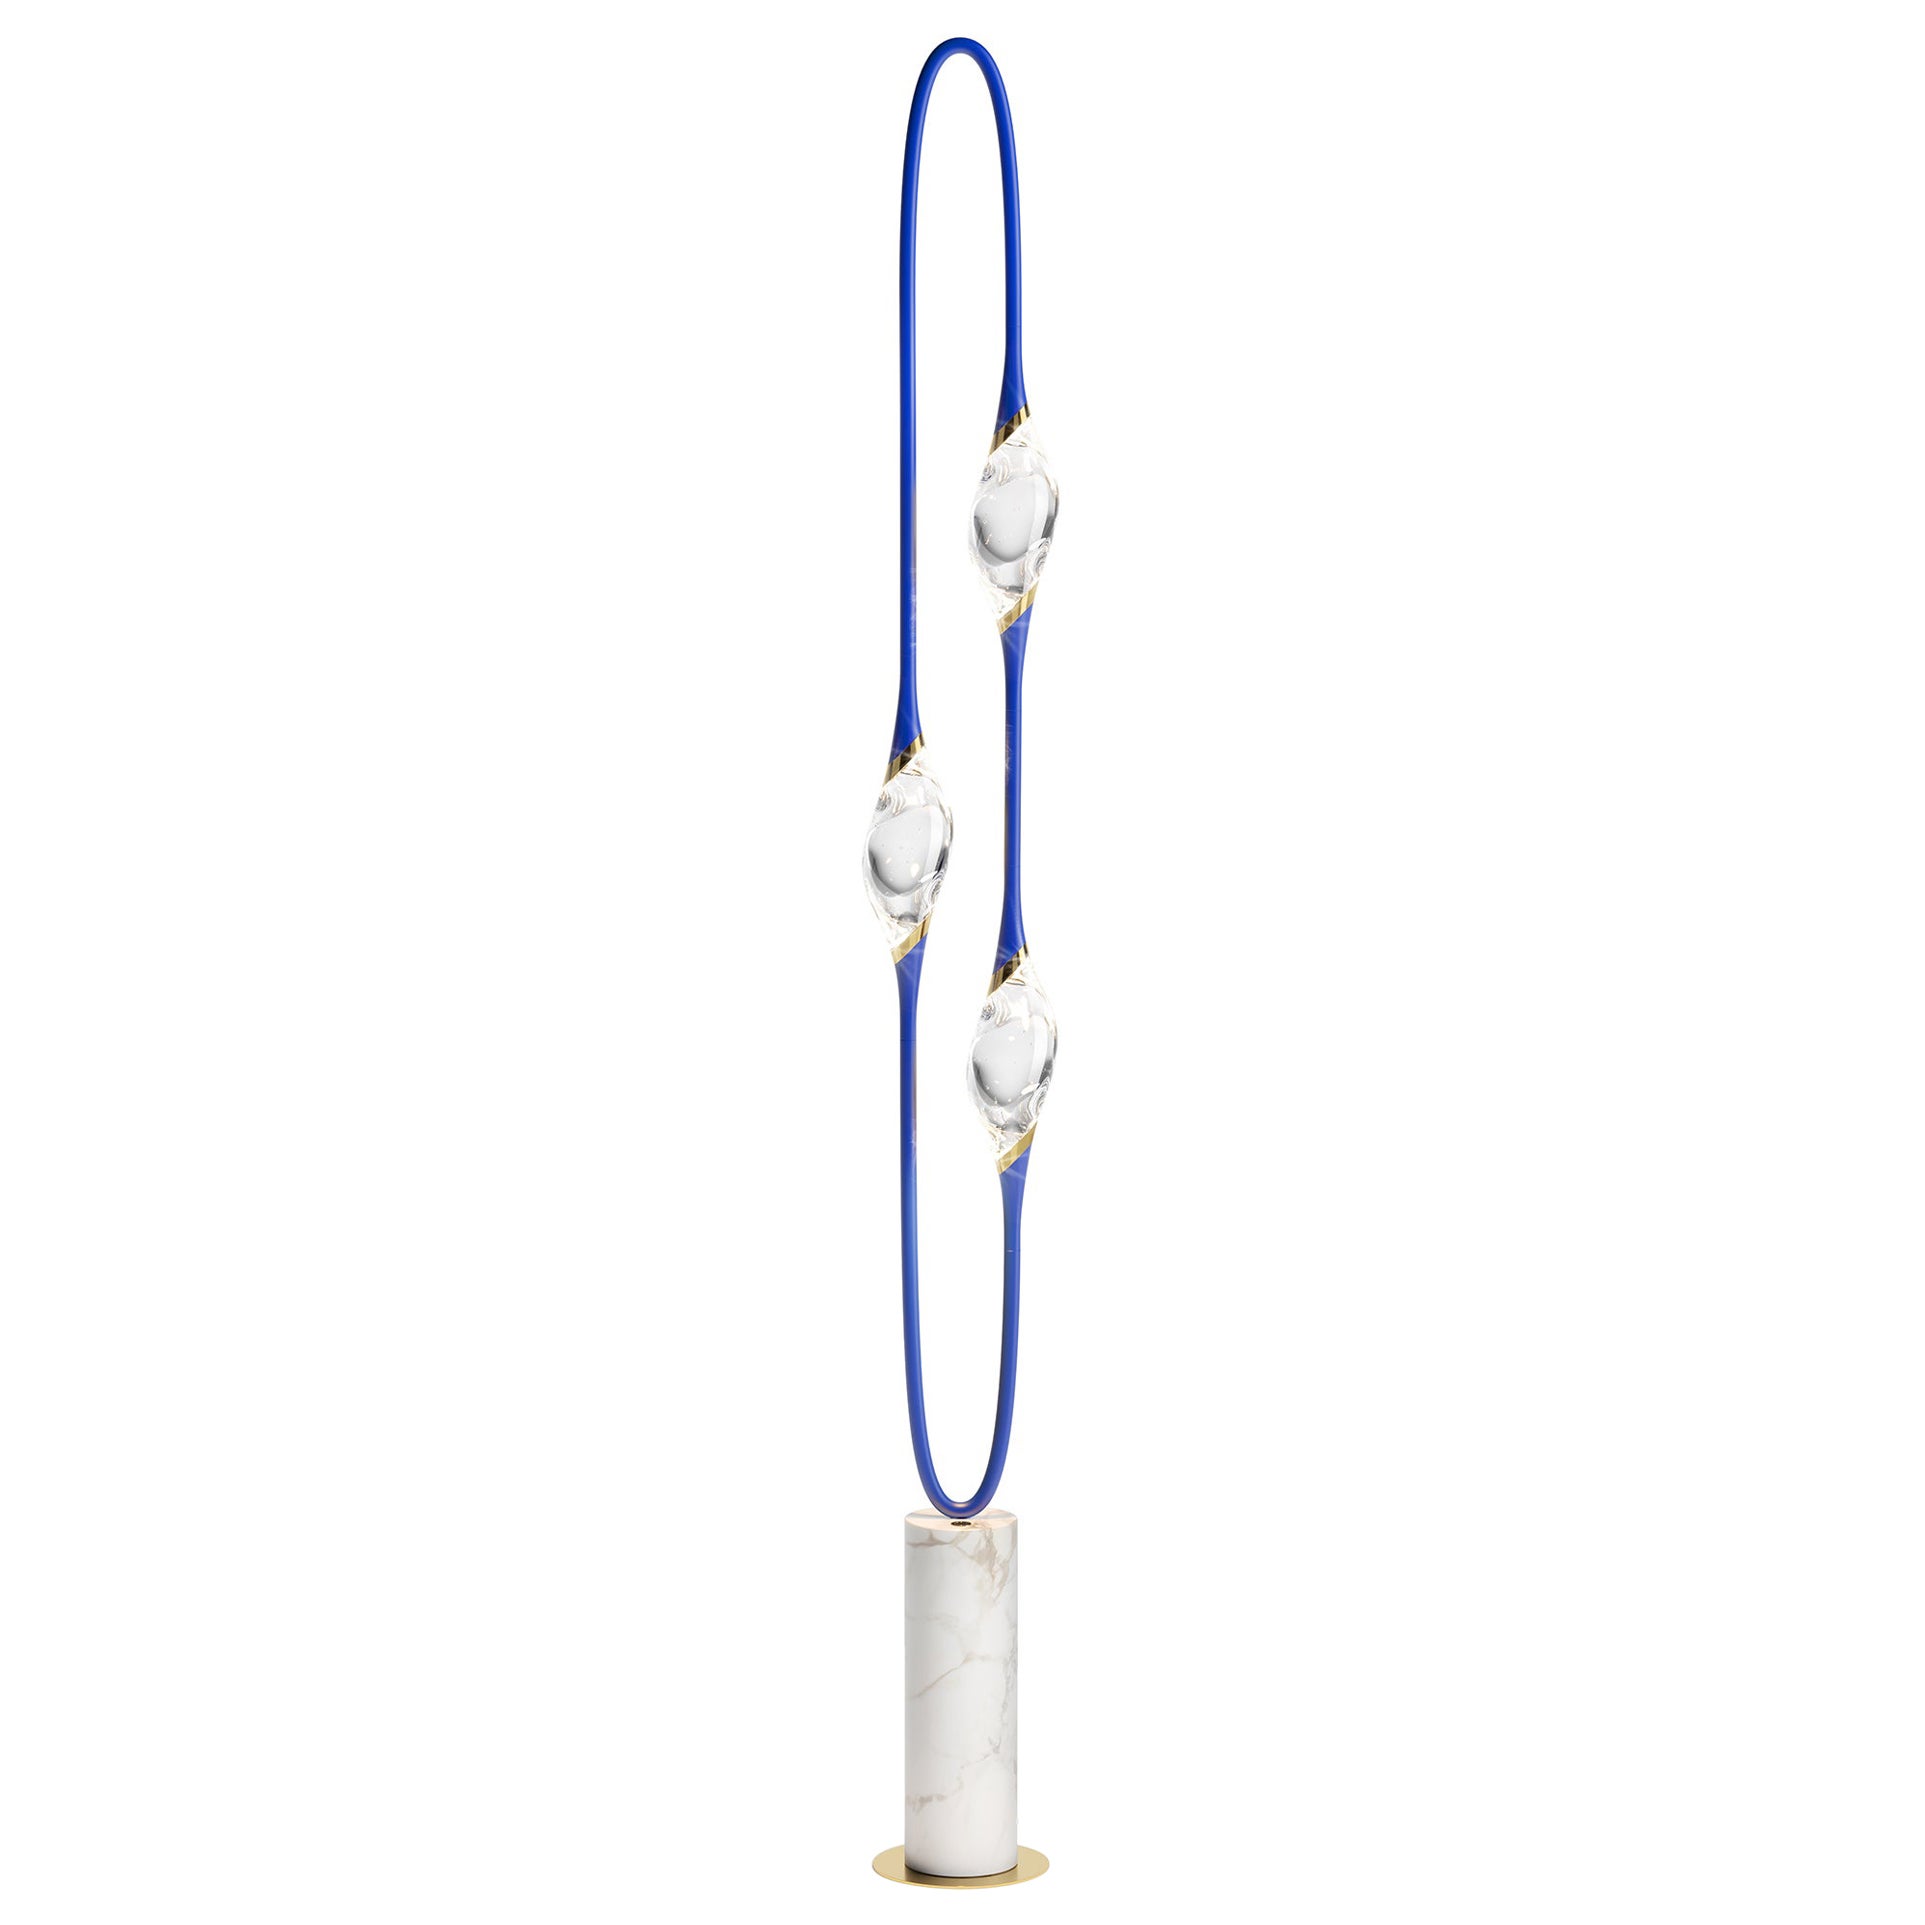 "Il Pezzo 12 Floor Lamp" - blue majorelle - calacatta marble - crystals - LEDs For Sale